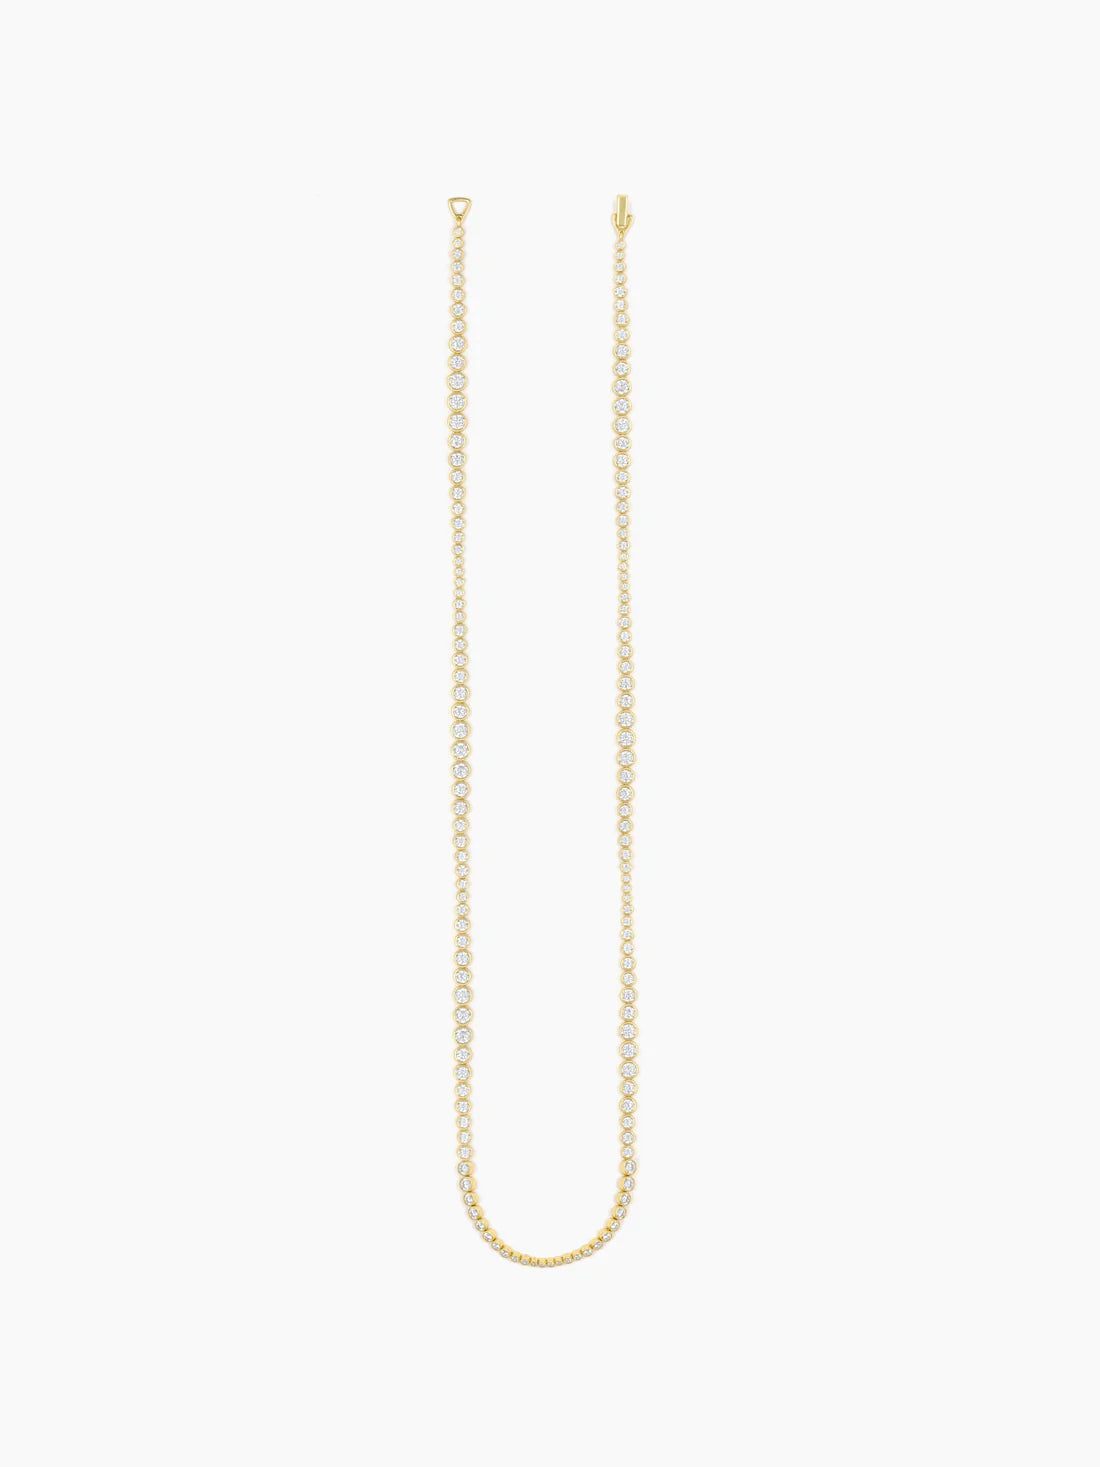 MODERN CLASSIC TENNIS NECKLACE 15031